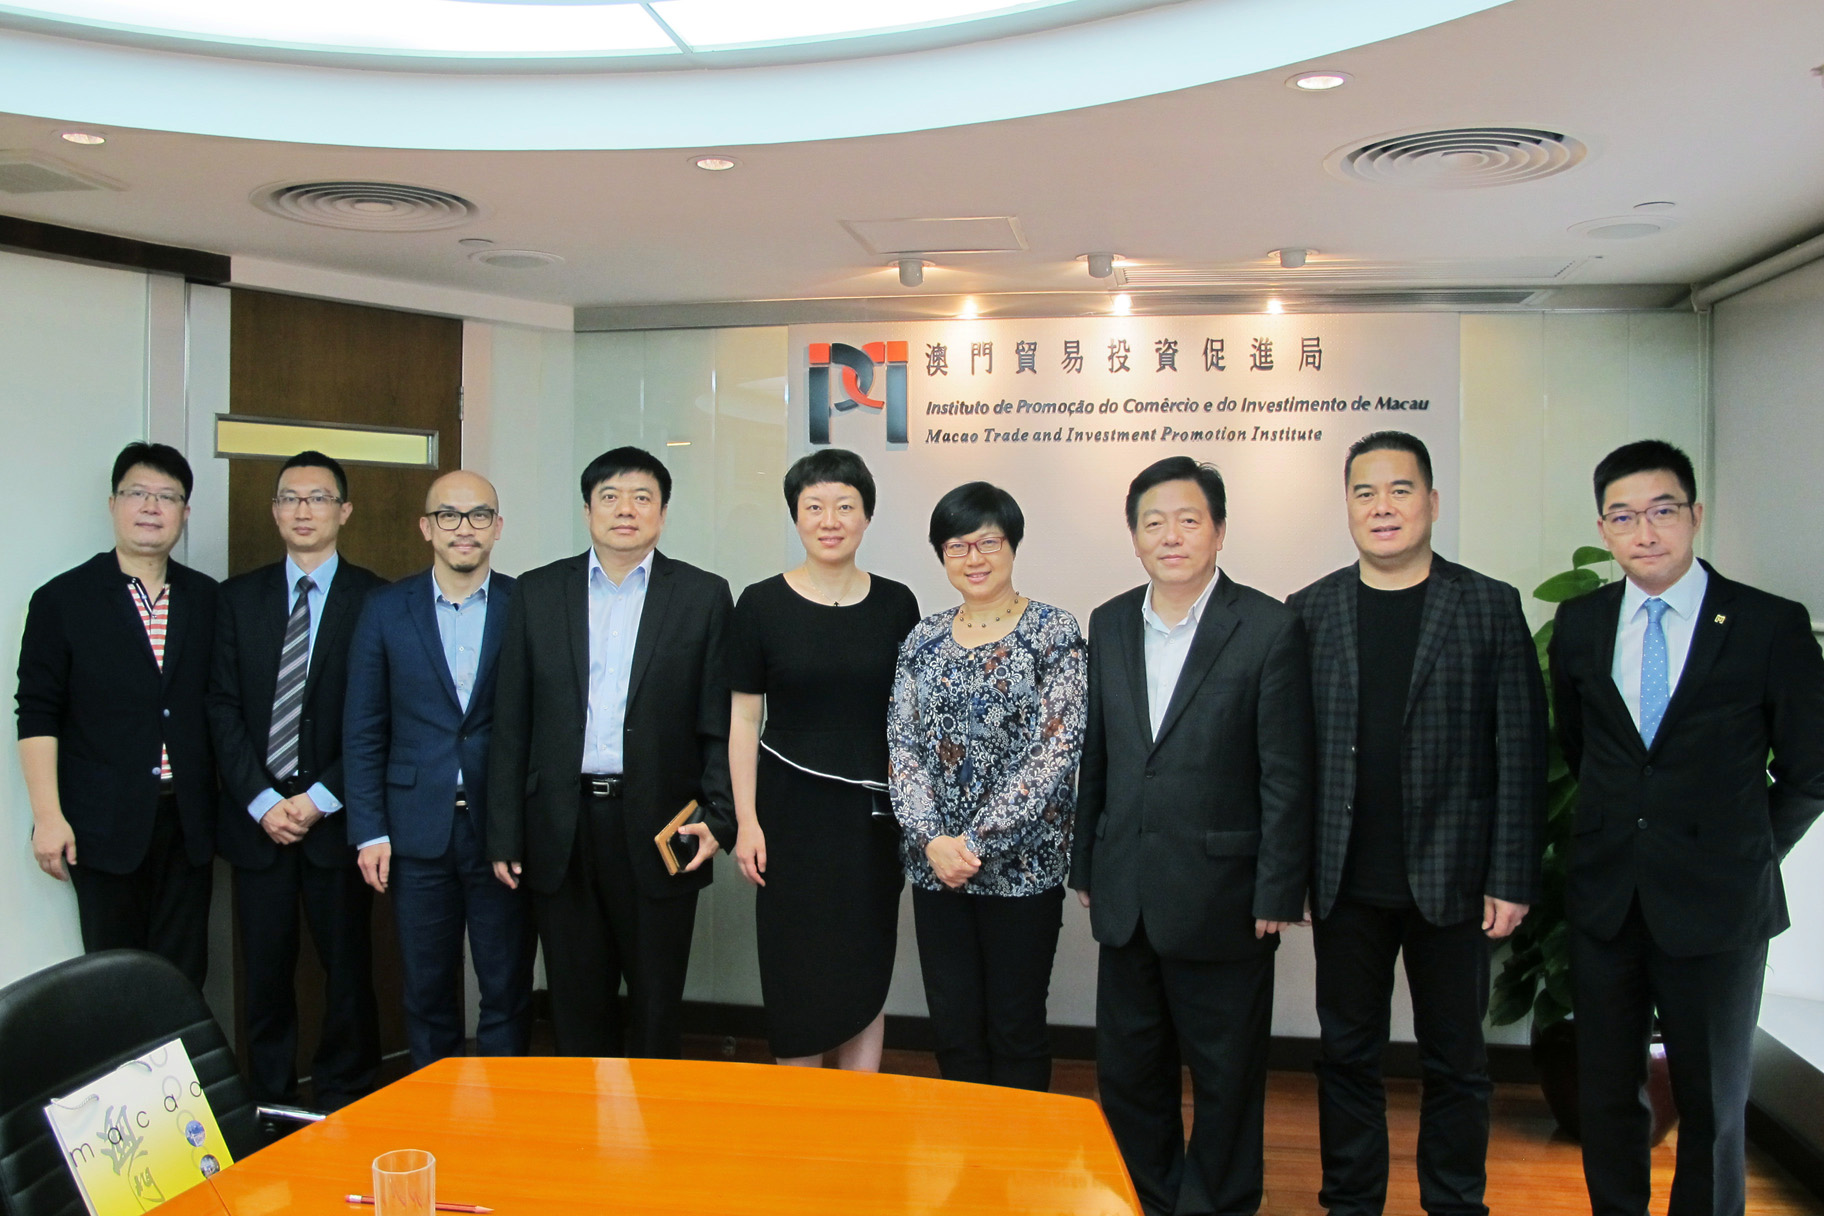 IPIM’s Executive Director Gloria Ung with Standing Committee Member and Head of the United Front Work Department of CPC Hangzhou Municipal Committee Tong Gulli and the delegation at IPIM (13 June 2017)